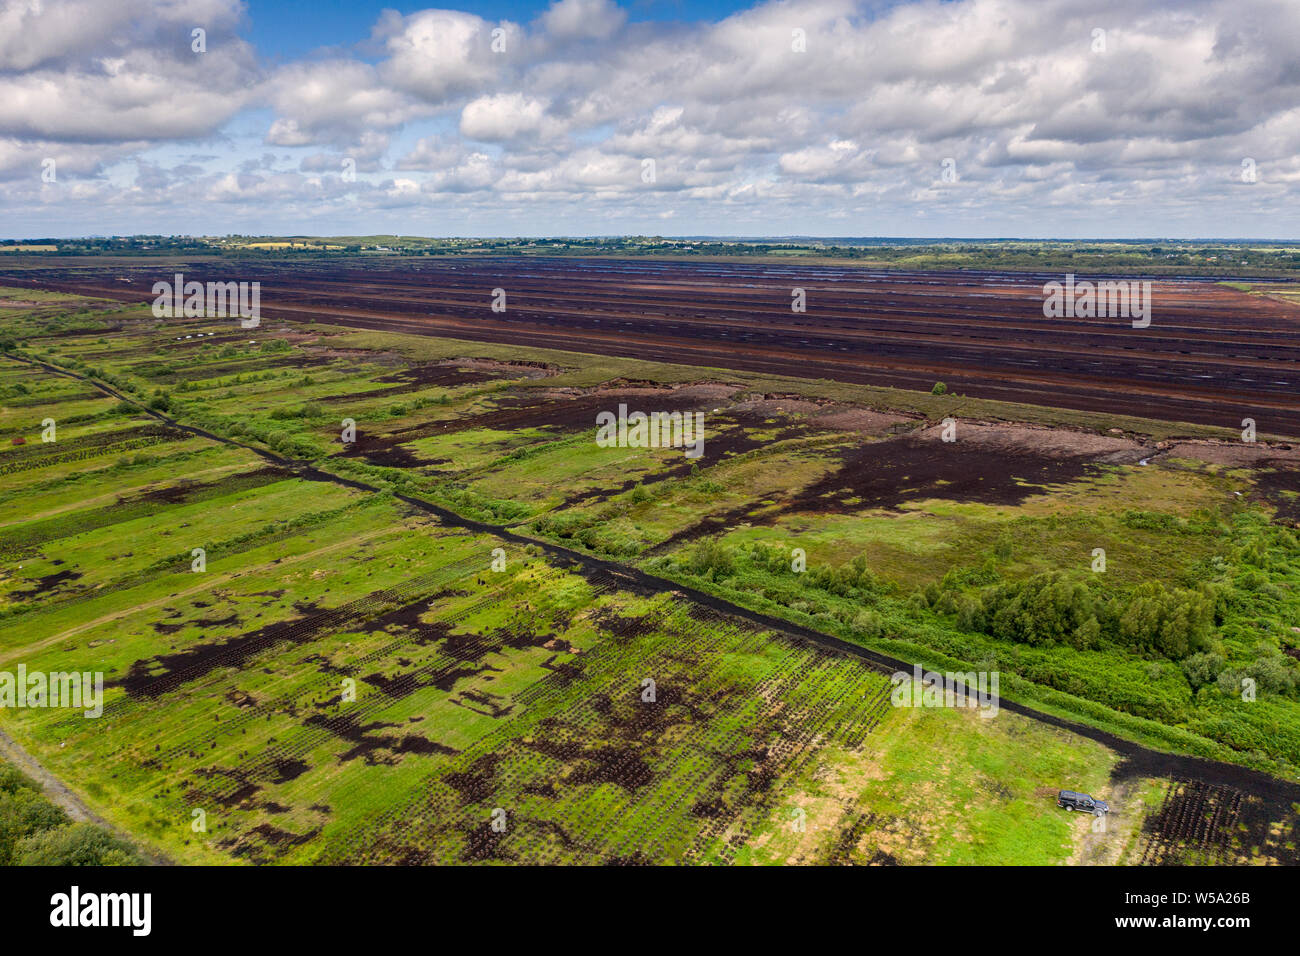 Aerial image of Bord Na Mona turf and peat bogs in the Irish countryside, County Kildare, Ireland Stock Photo